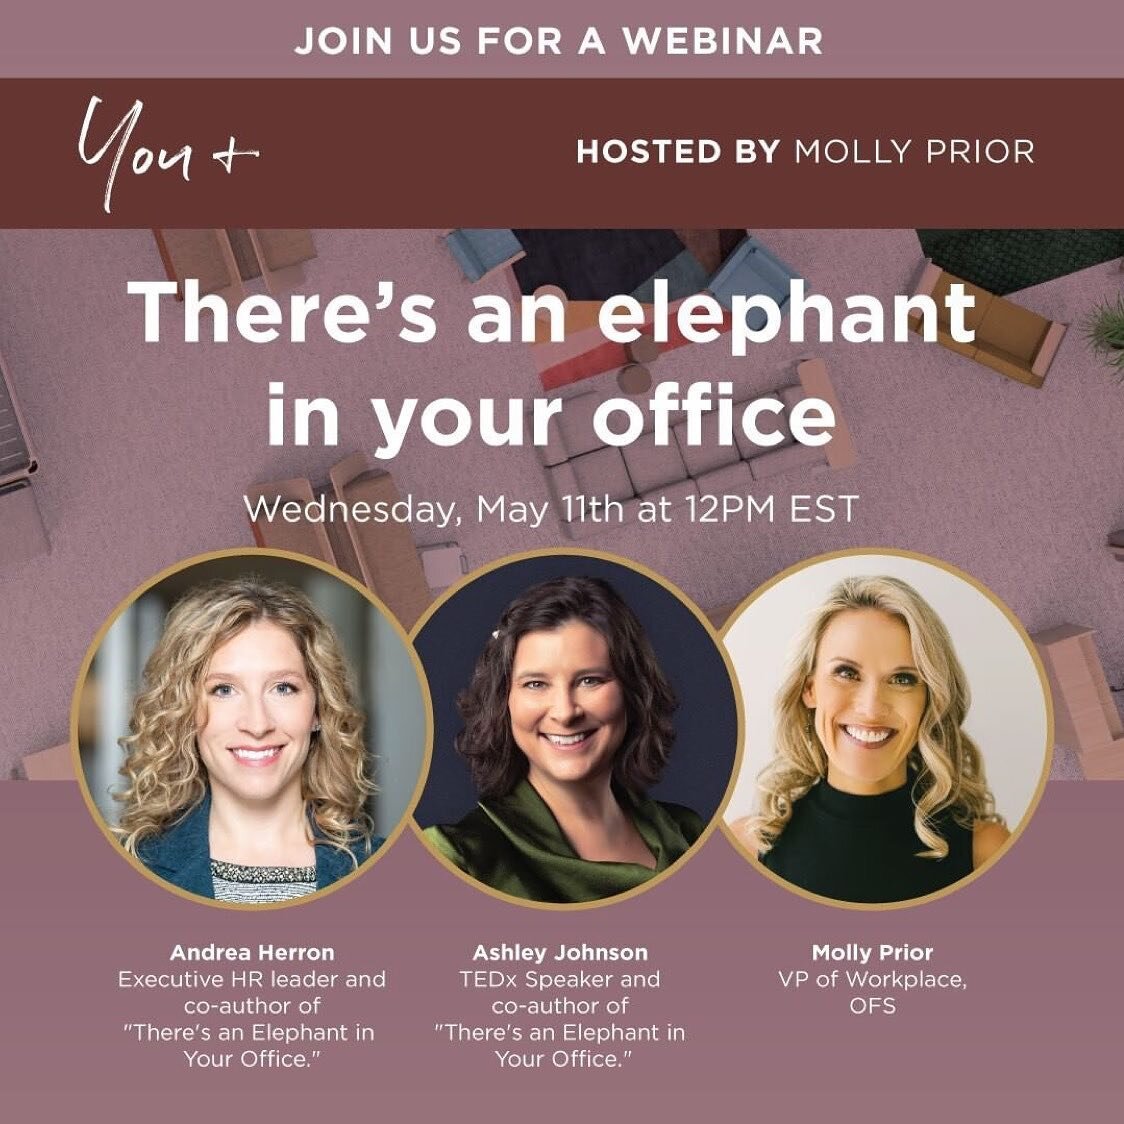 Repost from @ofs
&bull;
We're addressing the elephant in the room. 

Now, more than ever, managers who understand mental and emotional health are empowered to talk openly about it. To help us navigate this topic we welcome Andrea Herron and Ashley Jo